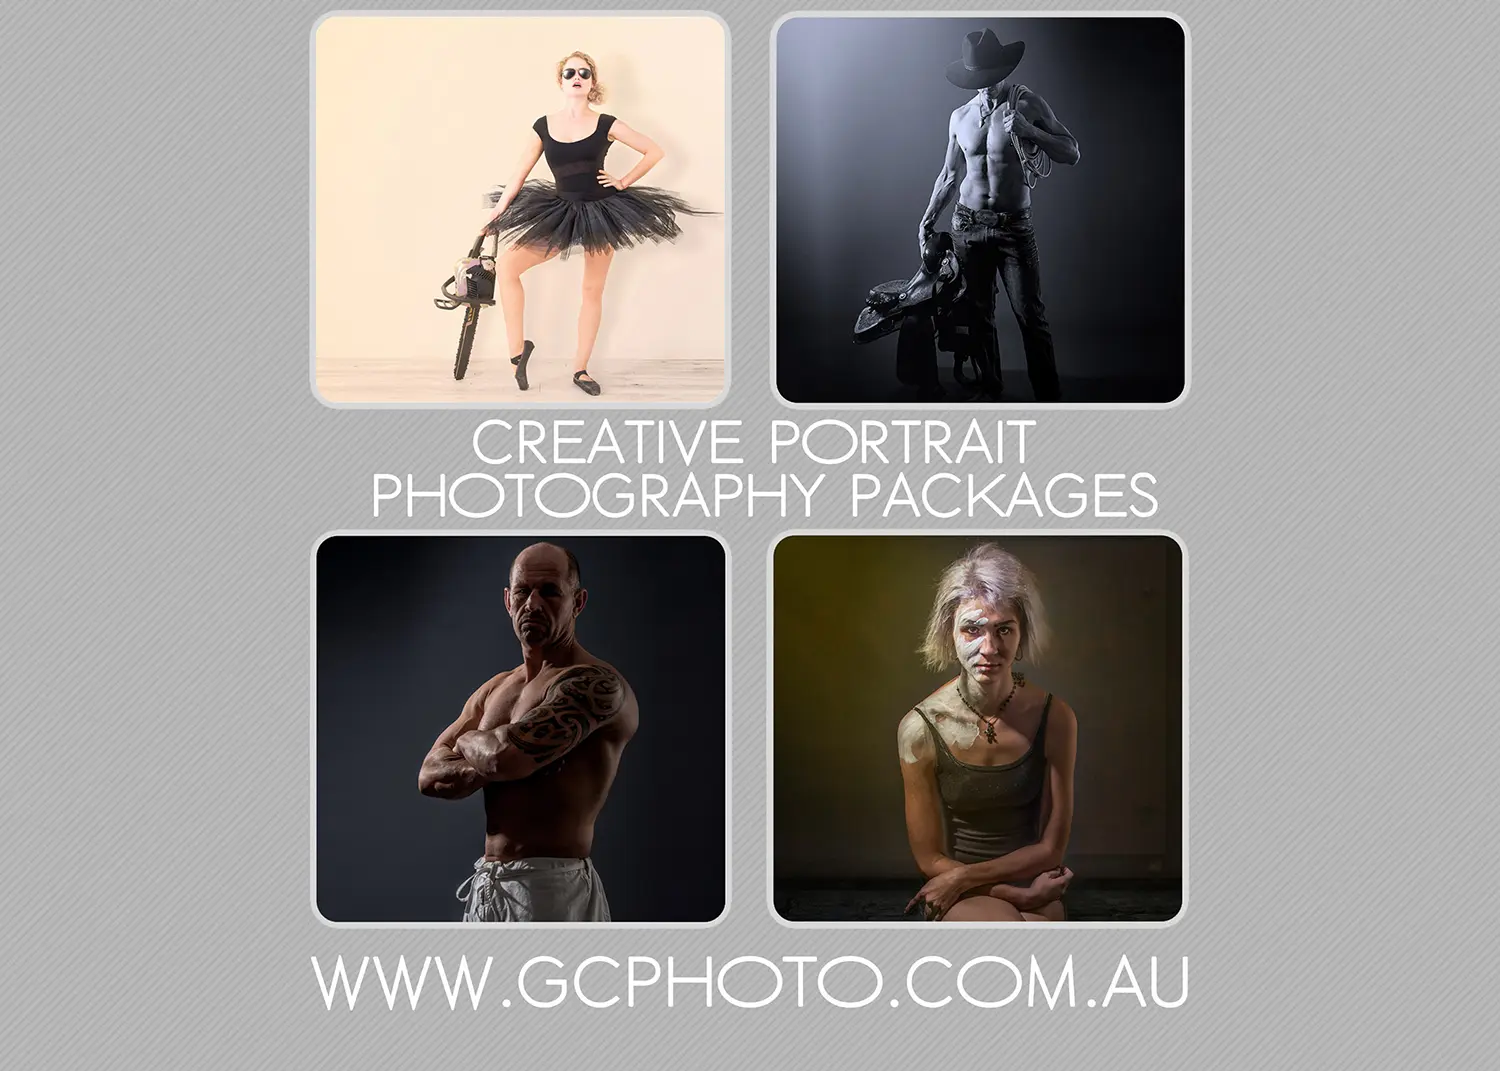 Creative portrait photography packages from GCPhoto Gold Coast Photography